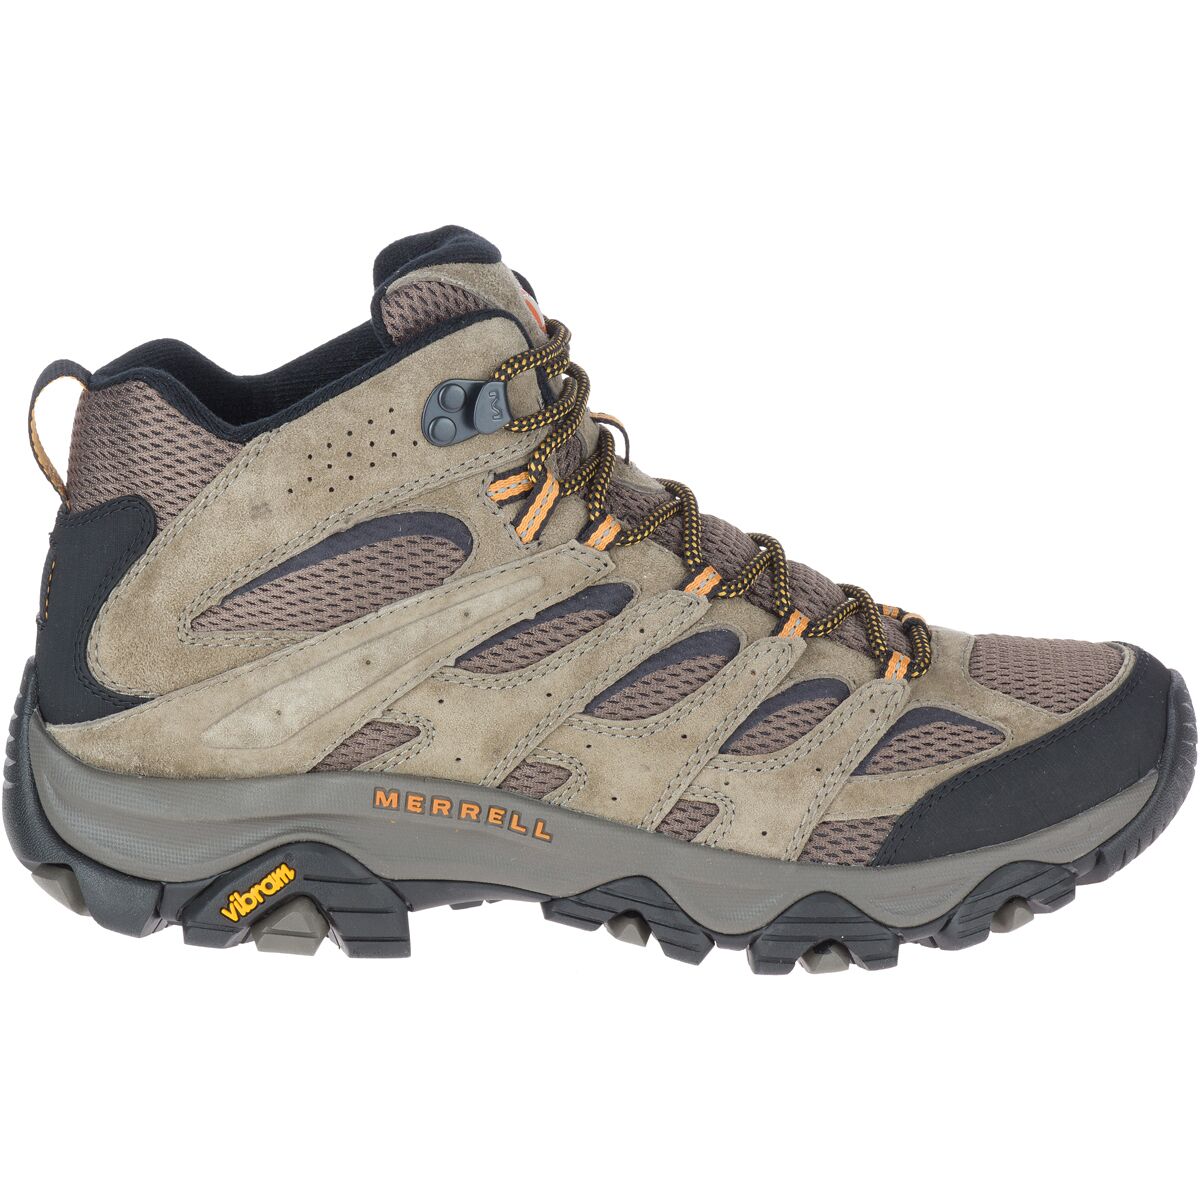 Merrell hiking boots & shoes: What do the pros think? - www.hikingfeet.com